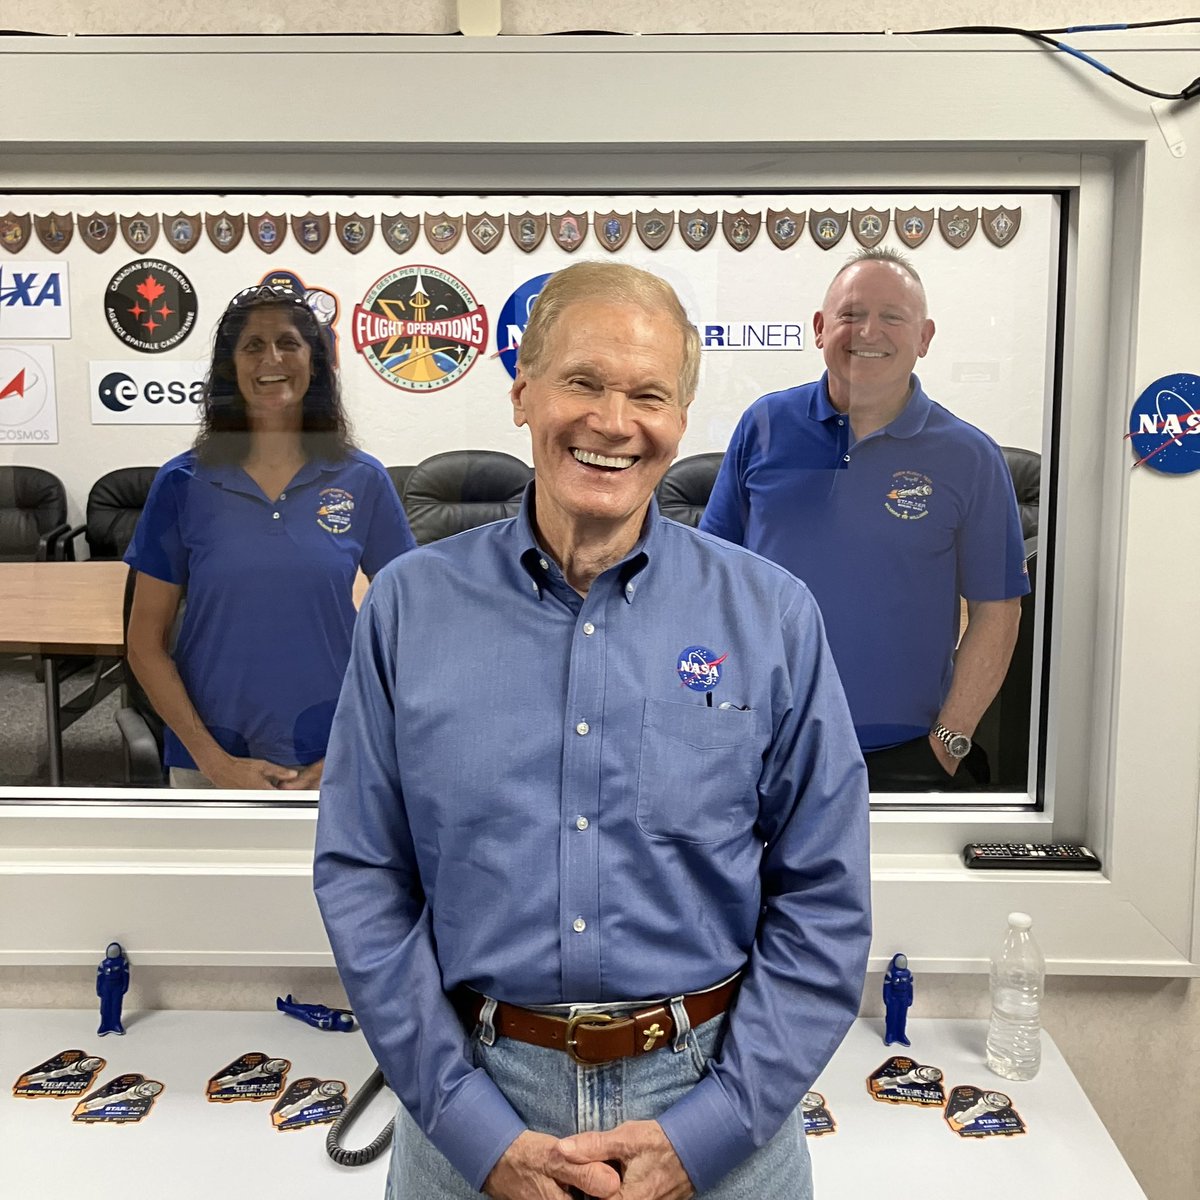 It's National Astronaut Day, and tomorrow, Butch Wilmore and @Astro_Suni lift off to the stars. Their mission: to test #Starliner for commercial flight. Sate travels, star sailors. You are the pride of our great nation.